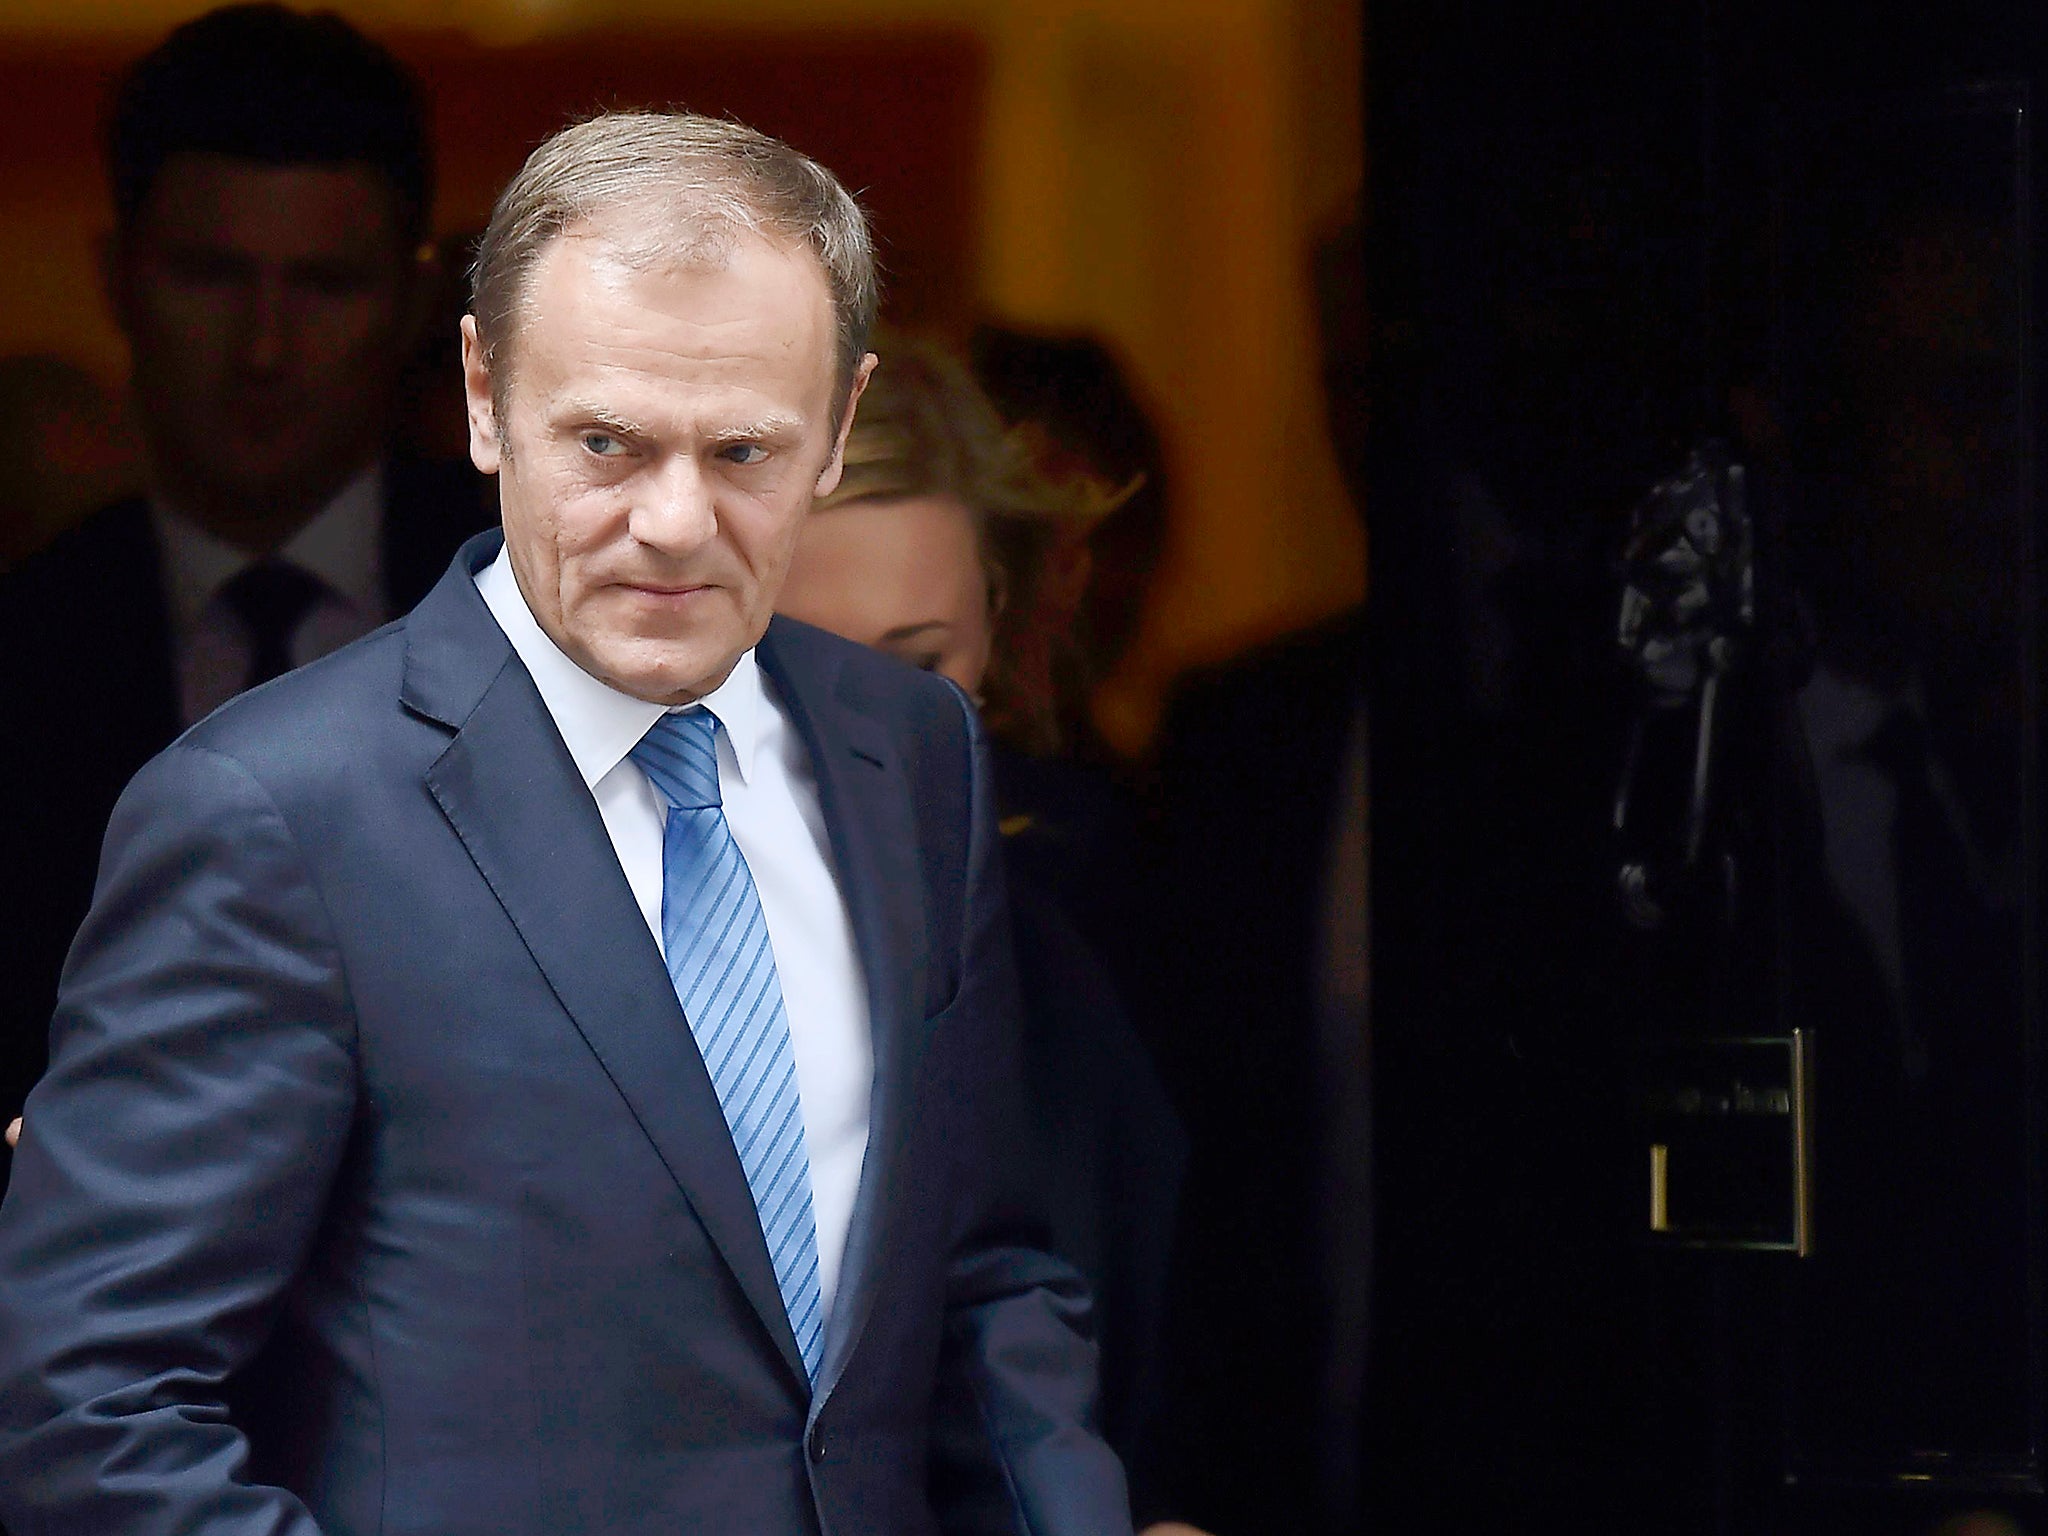 Donald Tusk, the President of the European Council, leaves after meeting Britain's Prime Minister, Theresa May inside 10 Downing Street